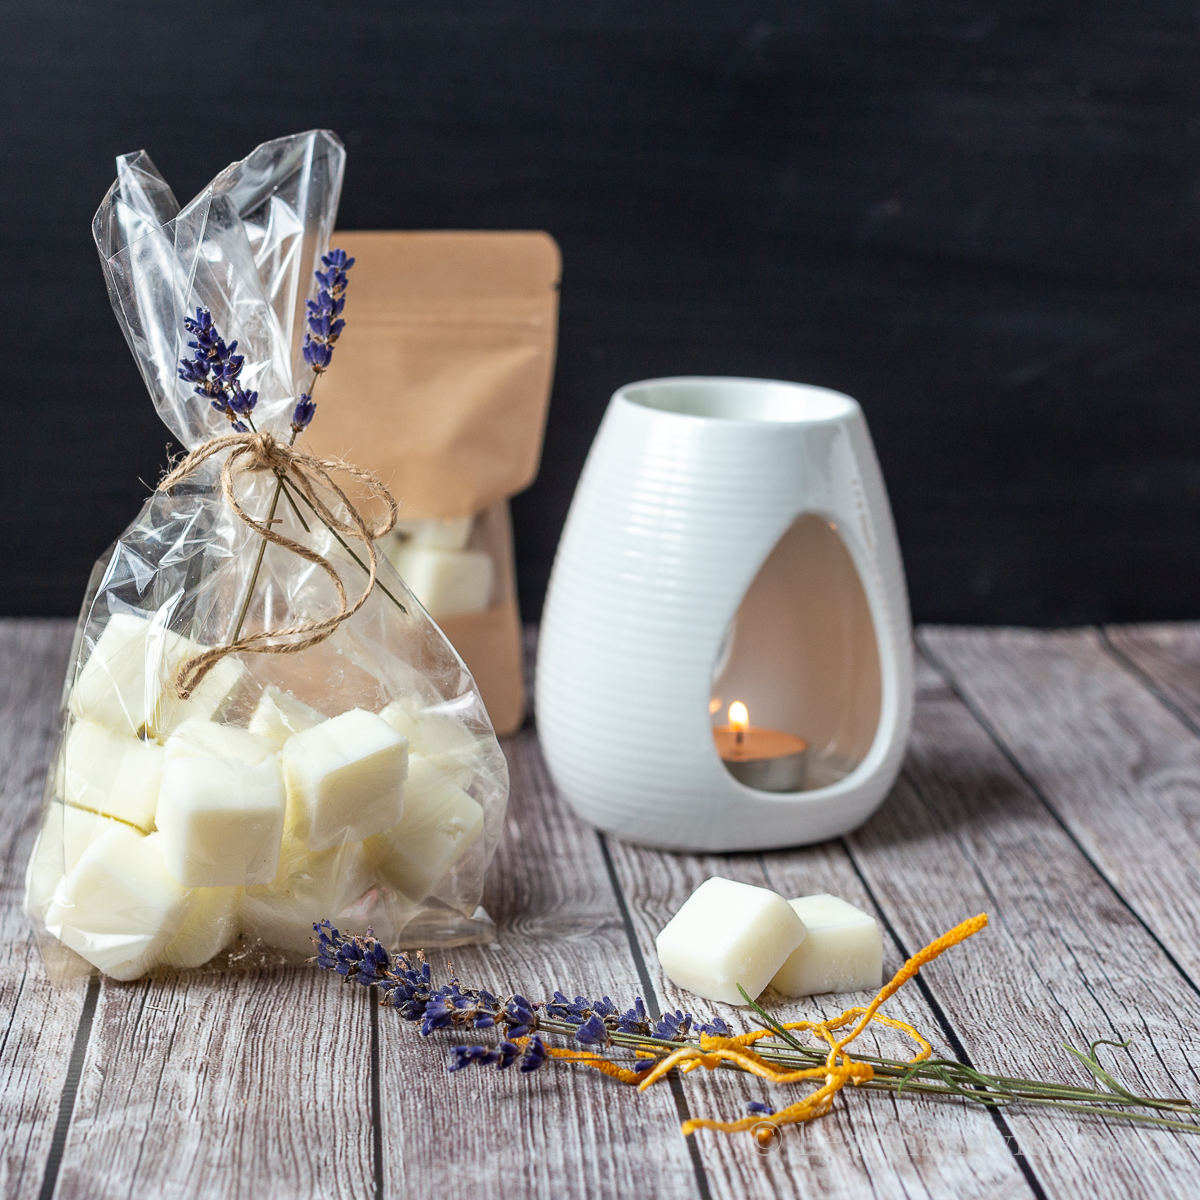 How to Make Wax Melts for Home or Gifting